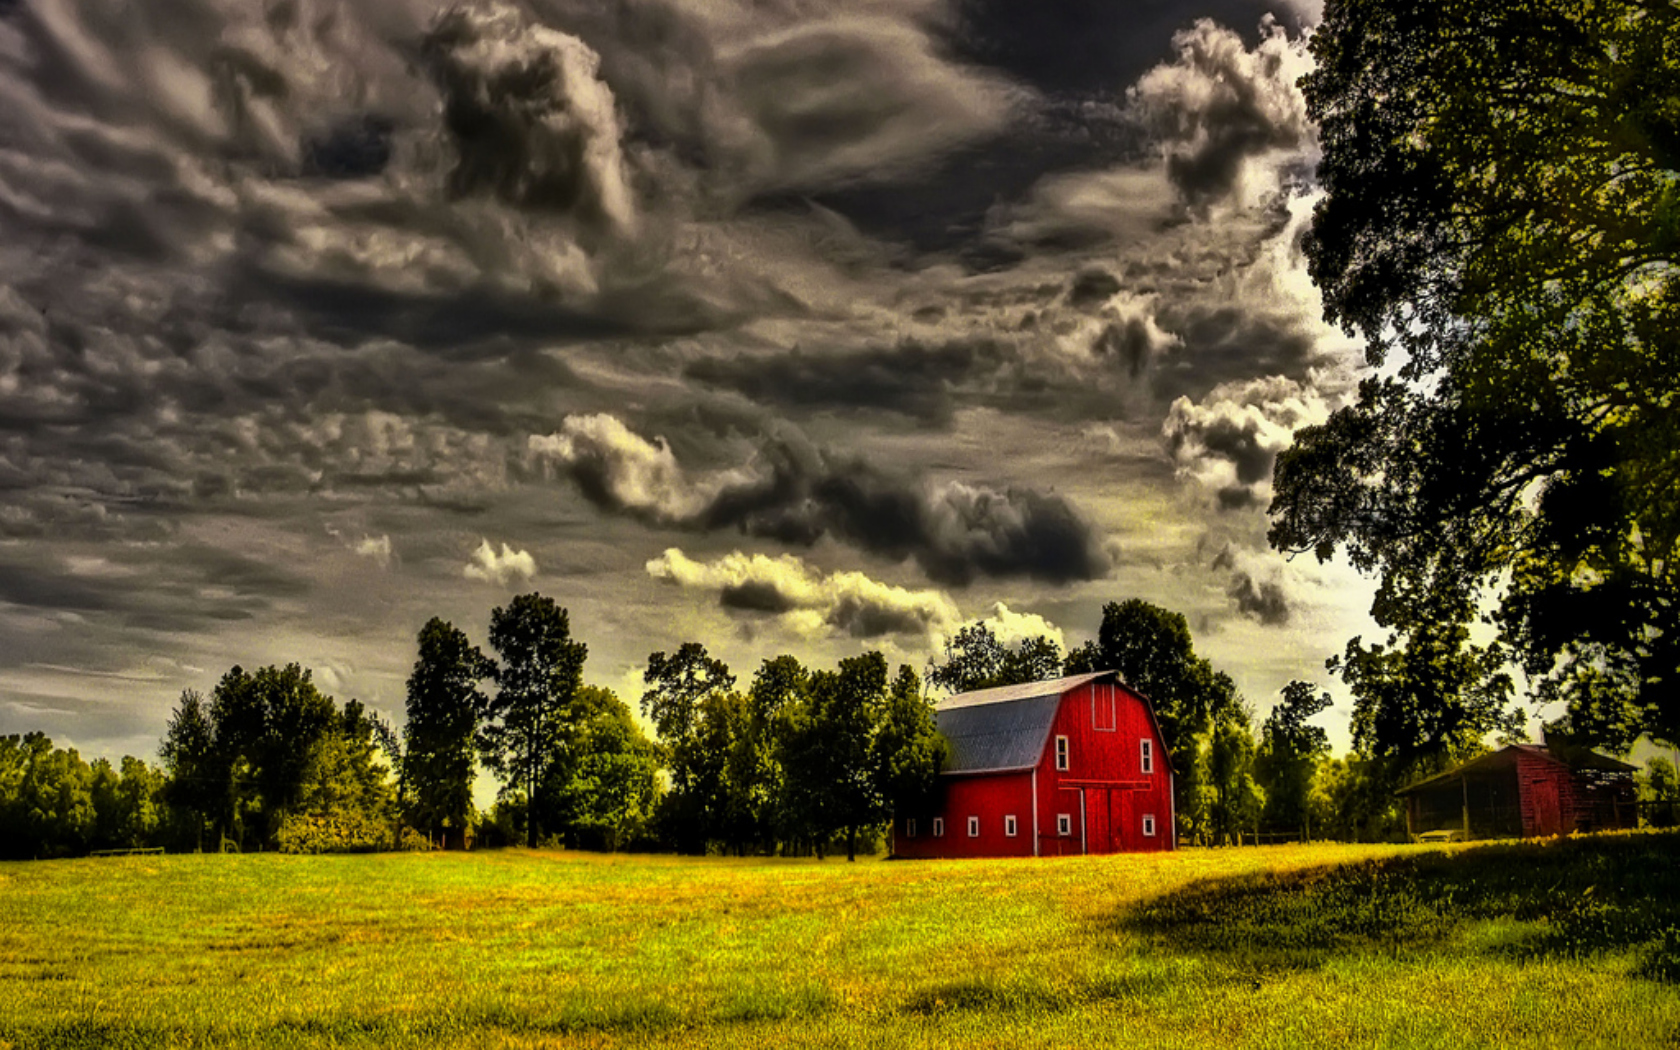 The Red Barn Wallpaper Background